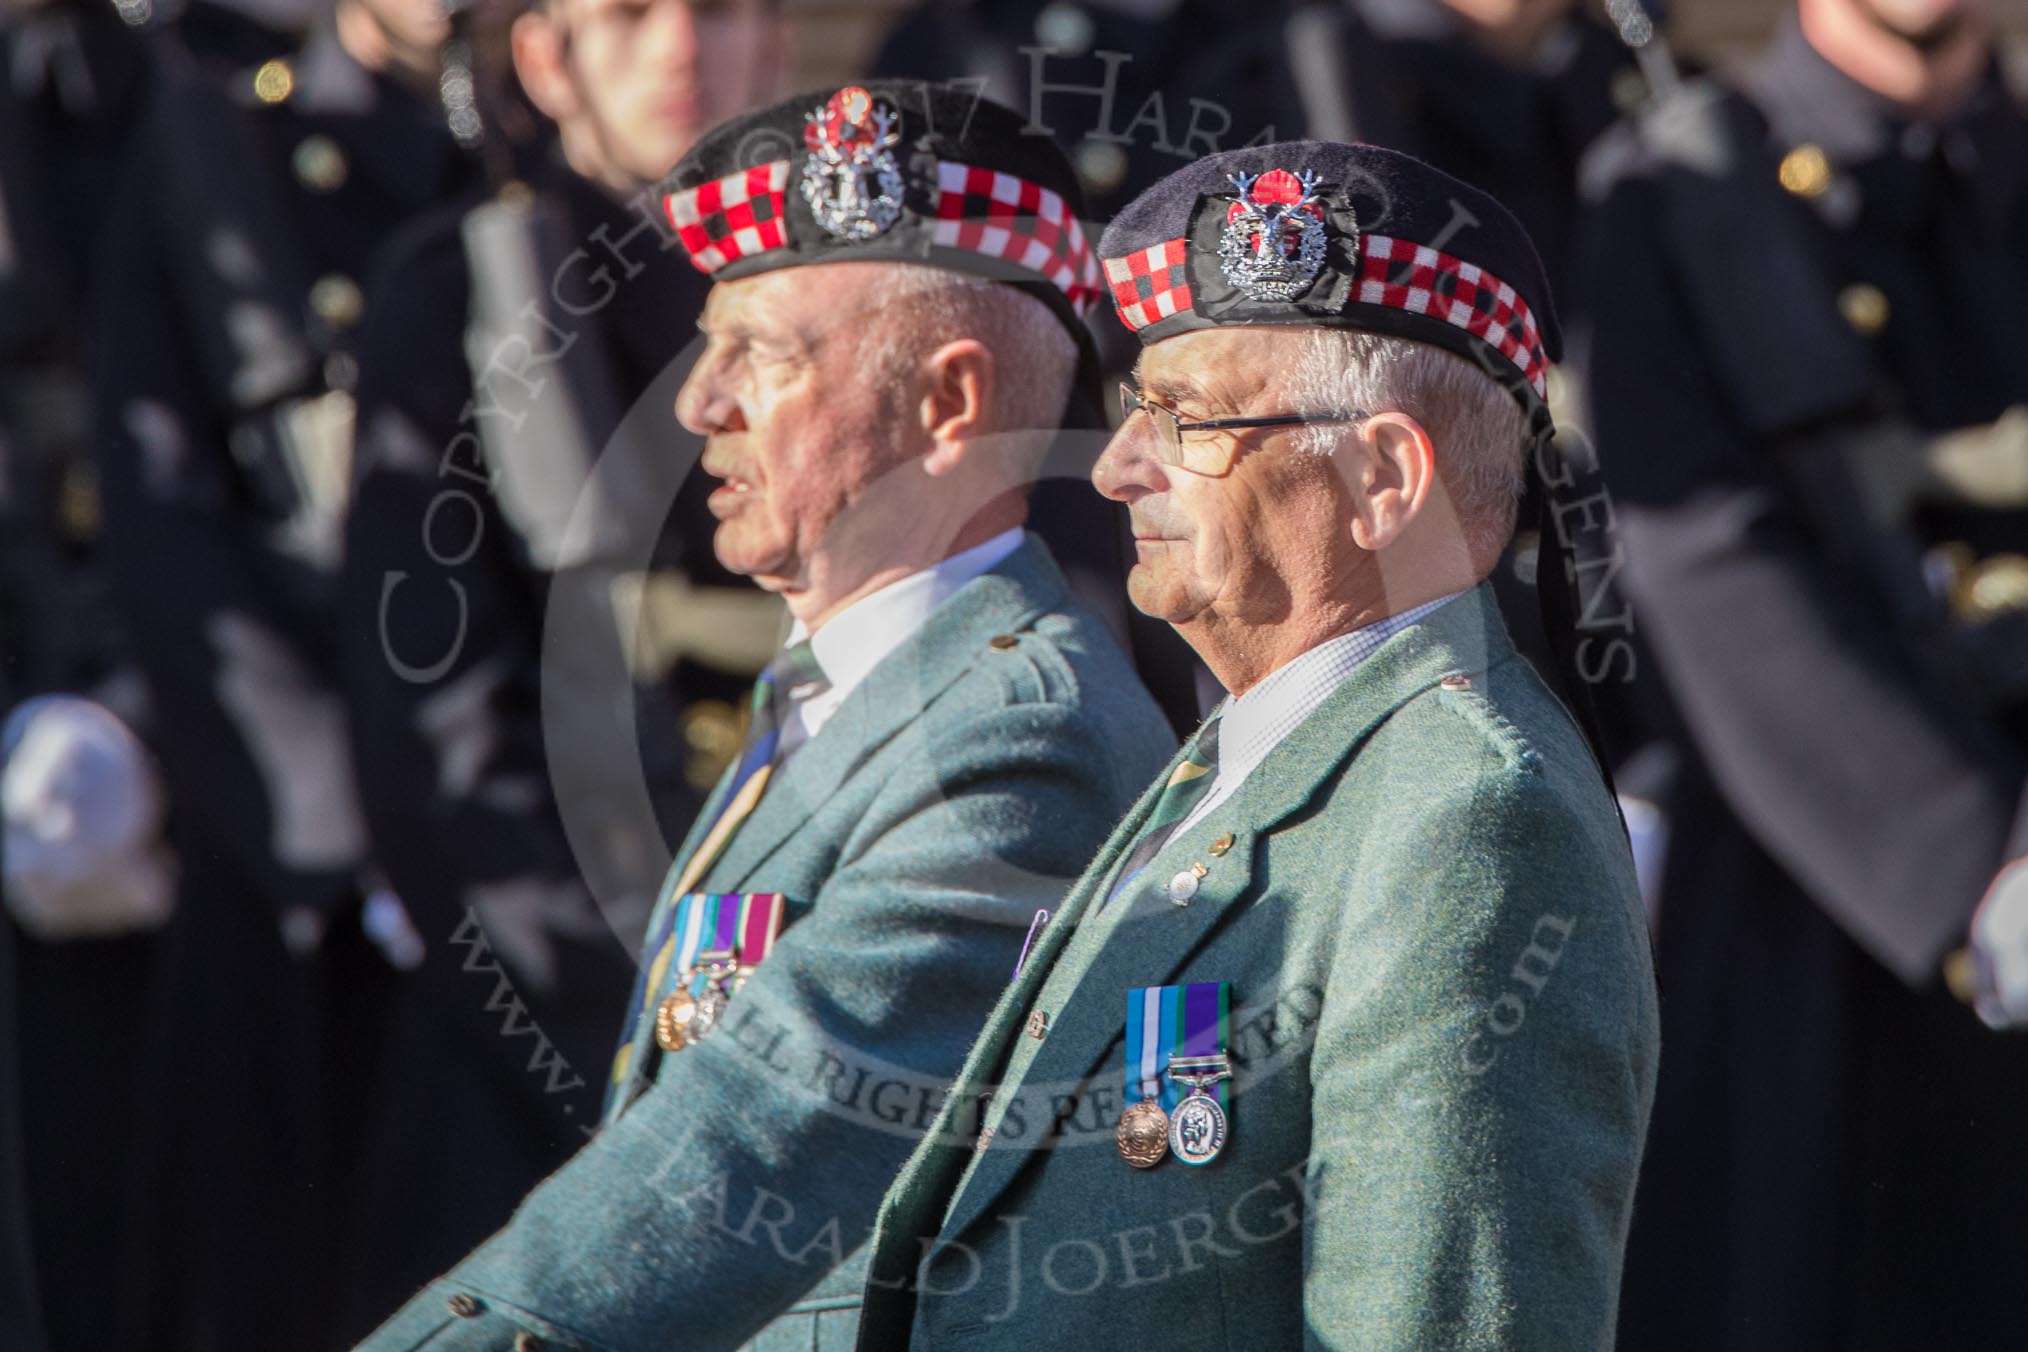 The Gordon Highlanders London Association (Group A12, 37 members) during the Royal British Legion March Past on Remembrance Sunday at the Cenotaph, Whitehall, Westminster, London, 11 November 2018, 11:58.